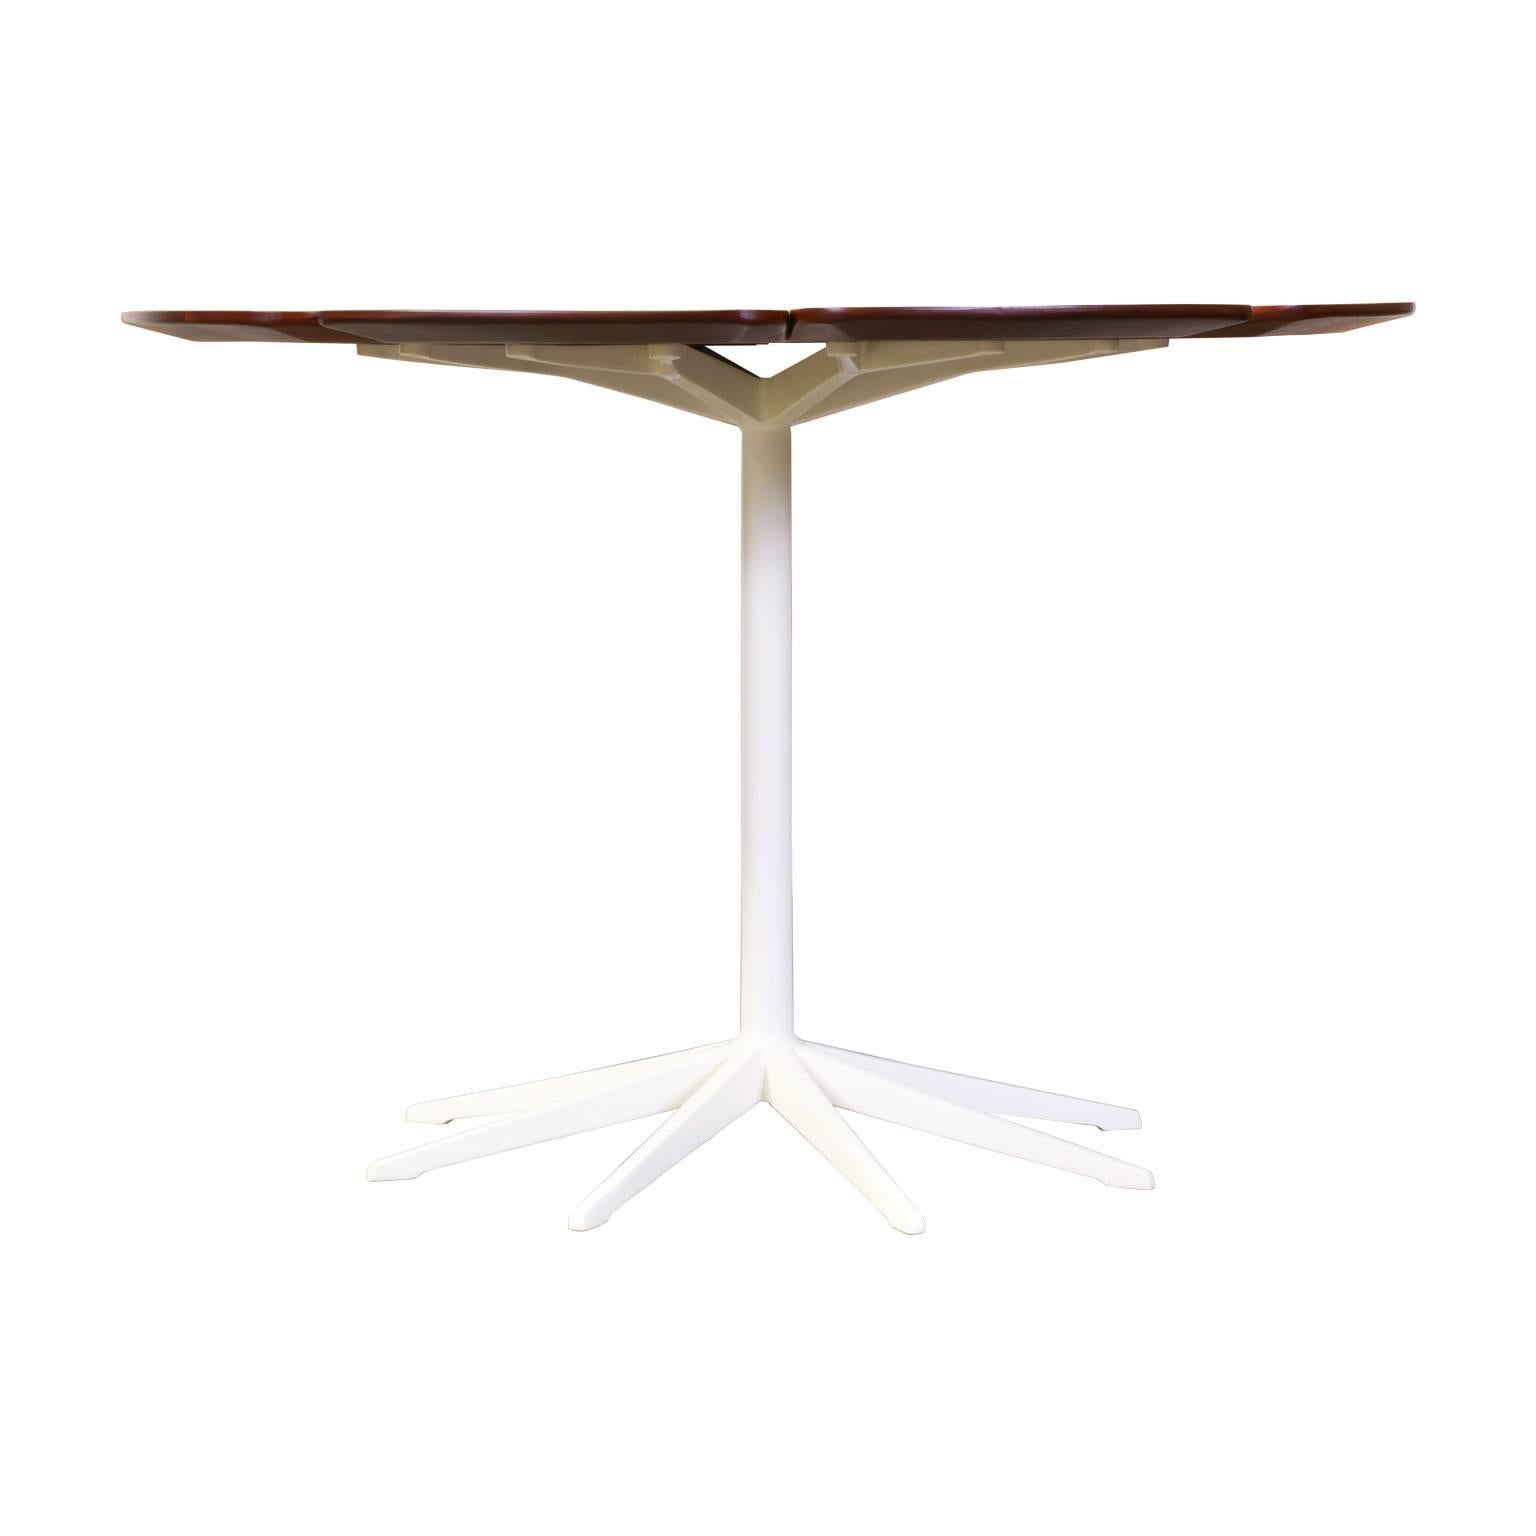 Designer: Richard Schultz.
Manufacturer: Knoll.
Period/Style: Mid-Century Modern.
Country: United States.
Date: 1960s.

Dimensions: 28.75″ H x 41.75″ D.
Materials: Walnut, enameled aluminum.
Condition: Excellent, newly refinished.
Number of